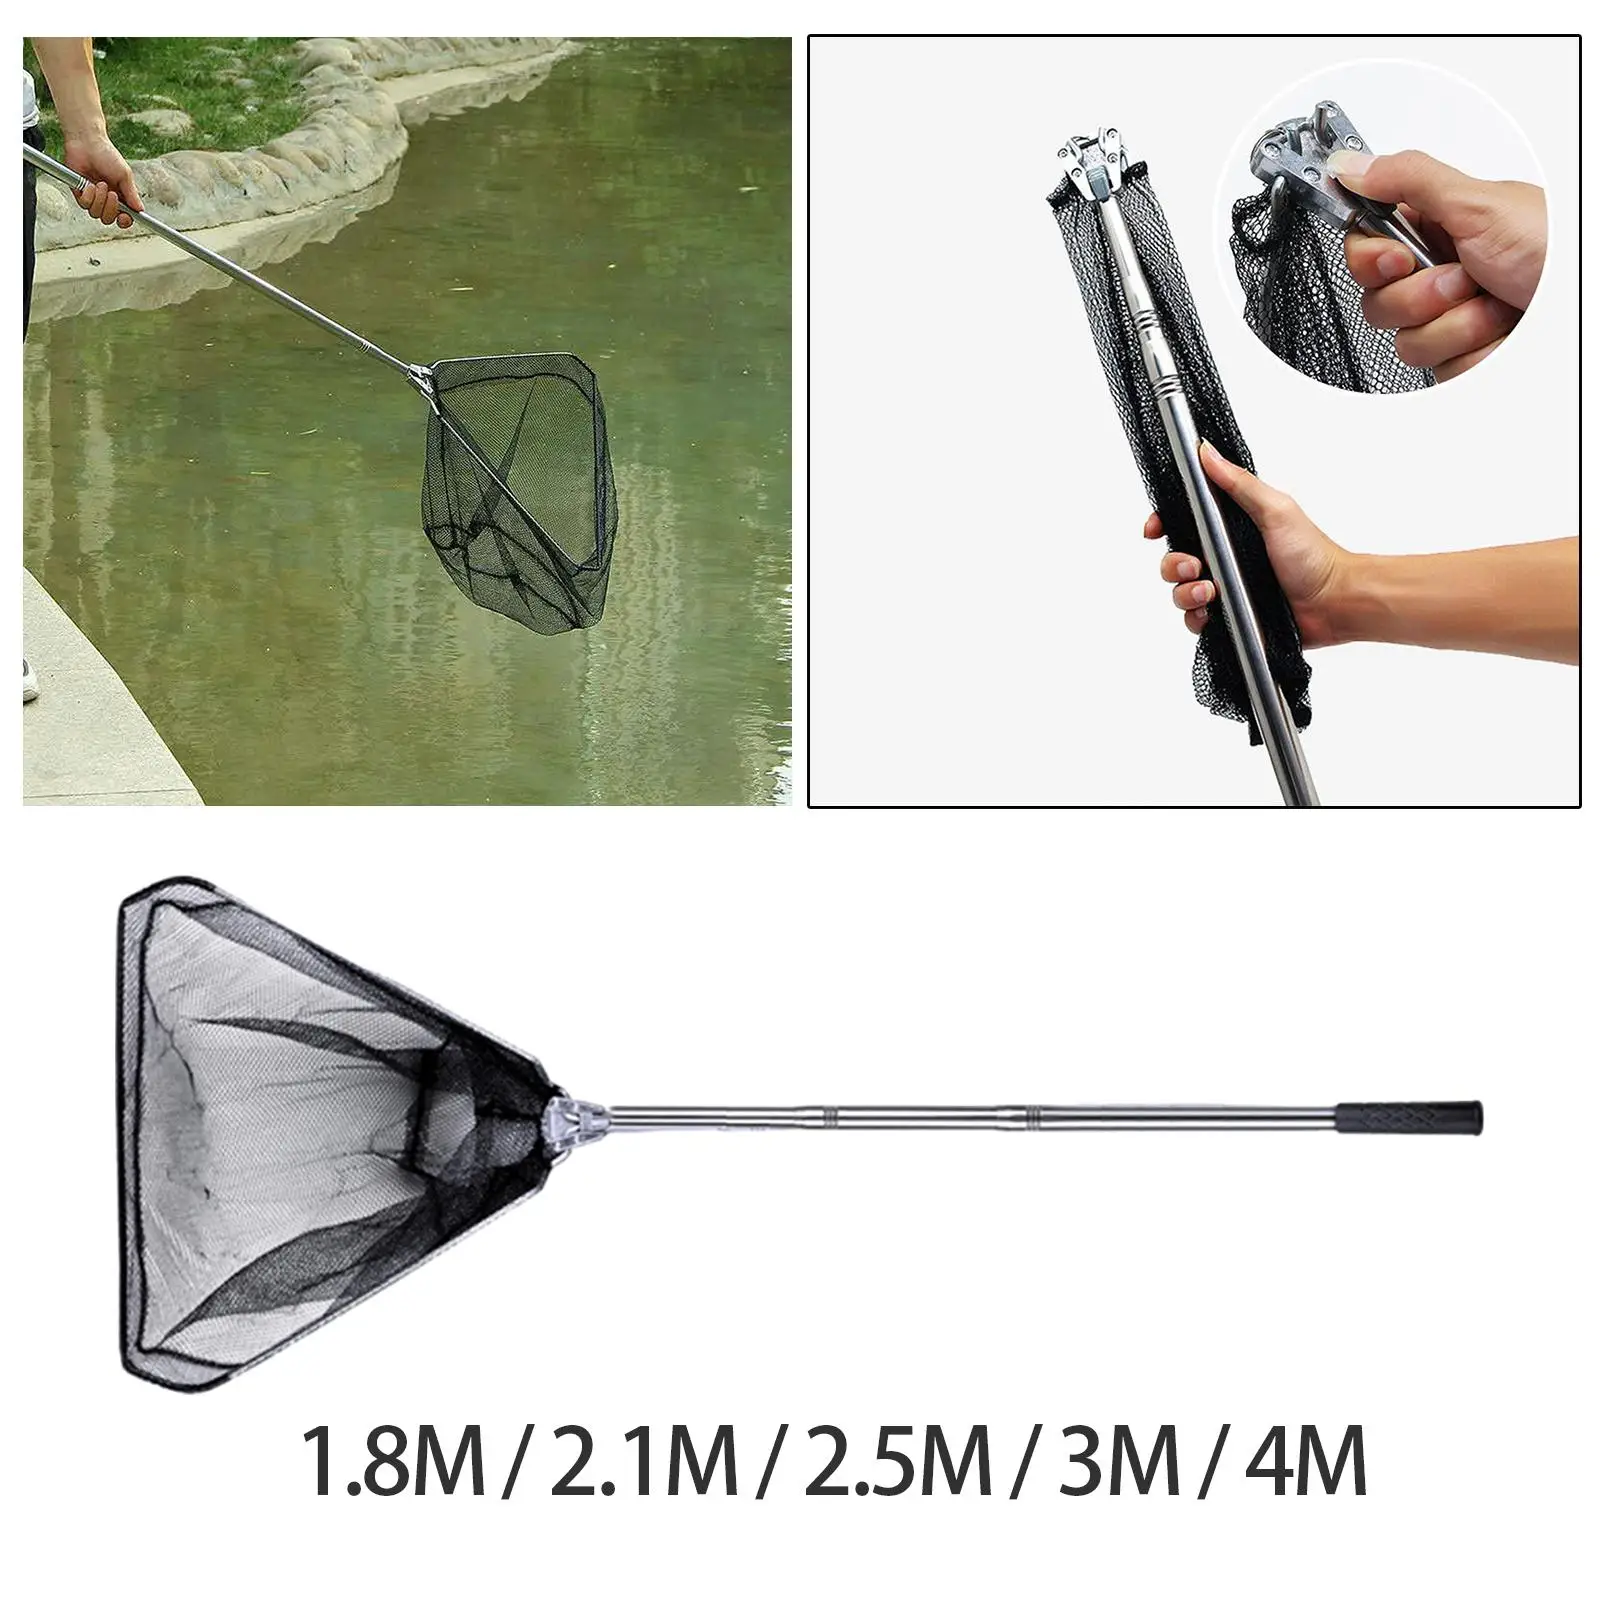 Fishing Landing Net Telescopic Multipurpose Collapsing Handle Strong Load Bearing Stainless Steel Accessories for Beginners